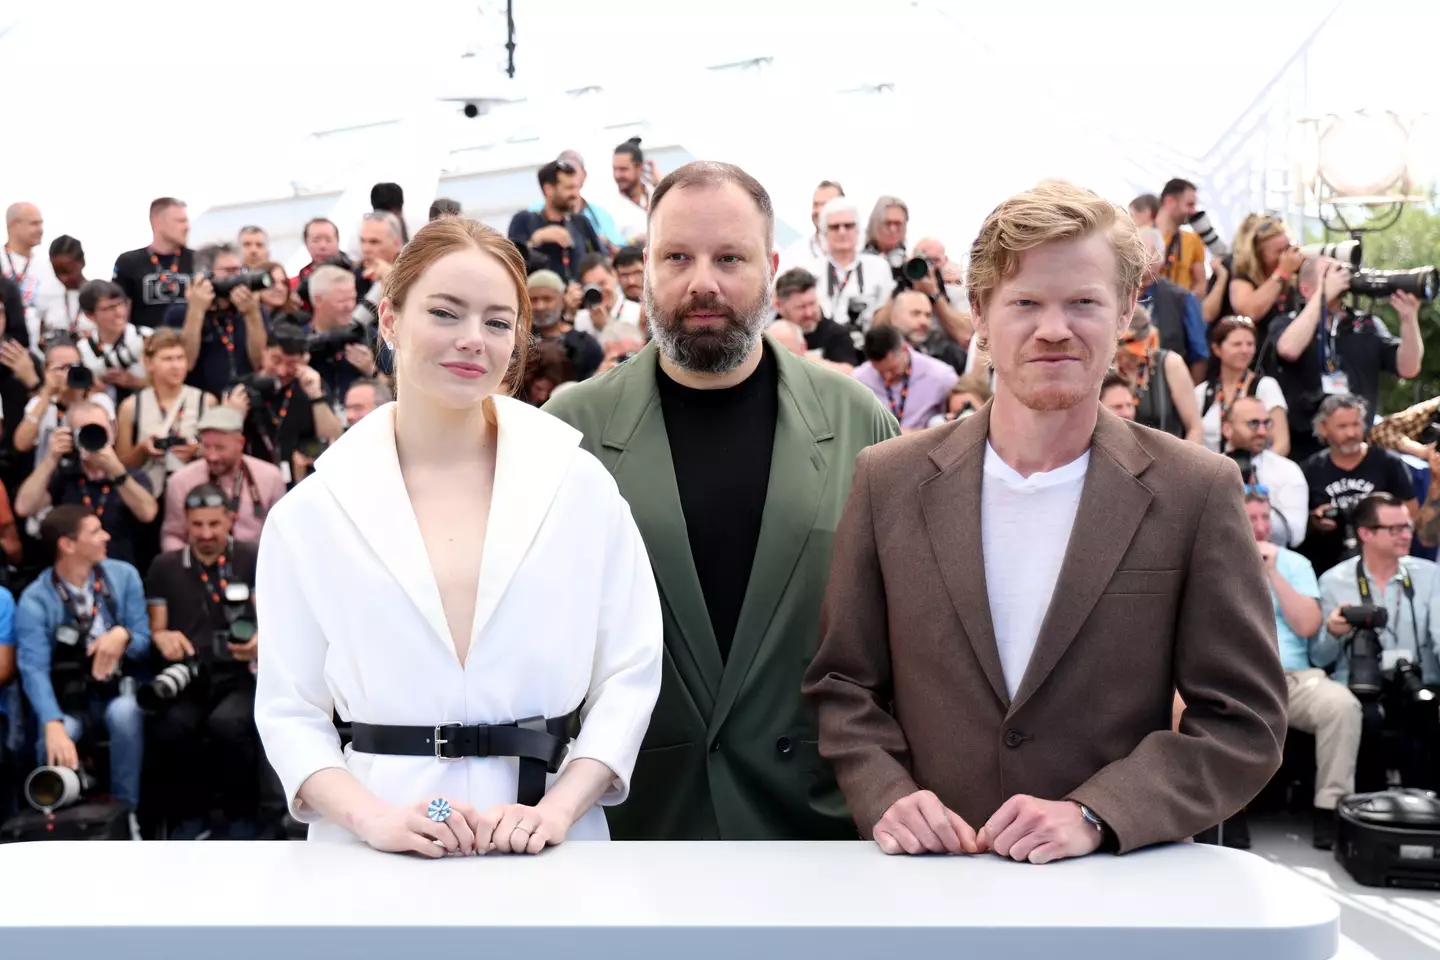 Emily Stone was at Cannes to promote her new movie alongside director Yorgos Lanthimos and co-star Jesse Plemons. (Pascal Le Segretain/Getty Images)